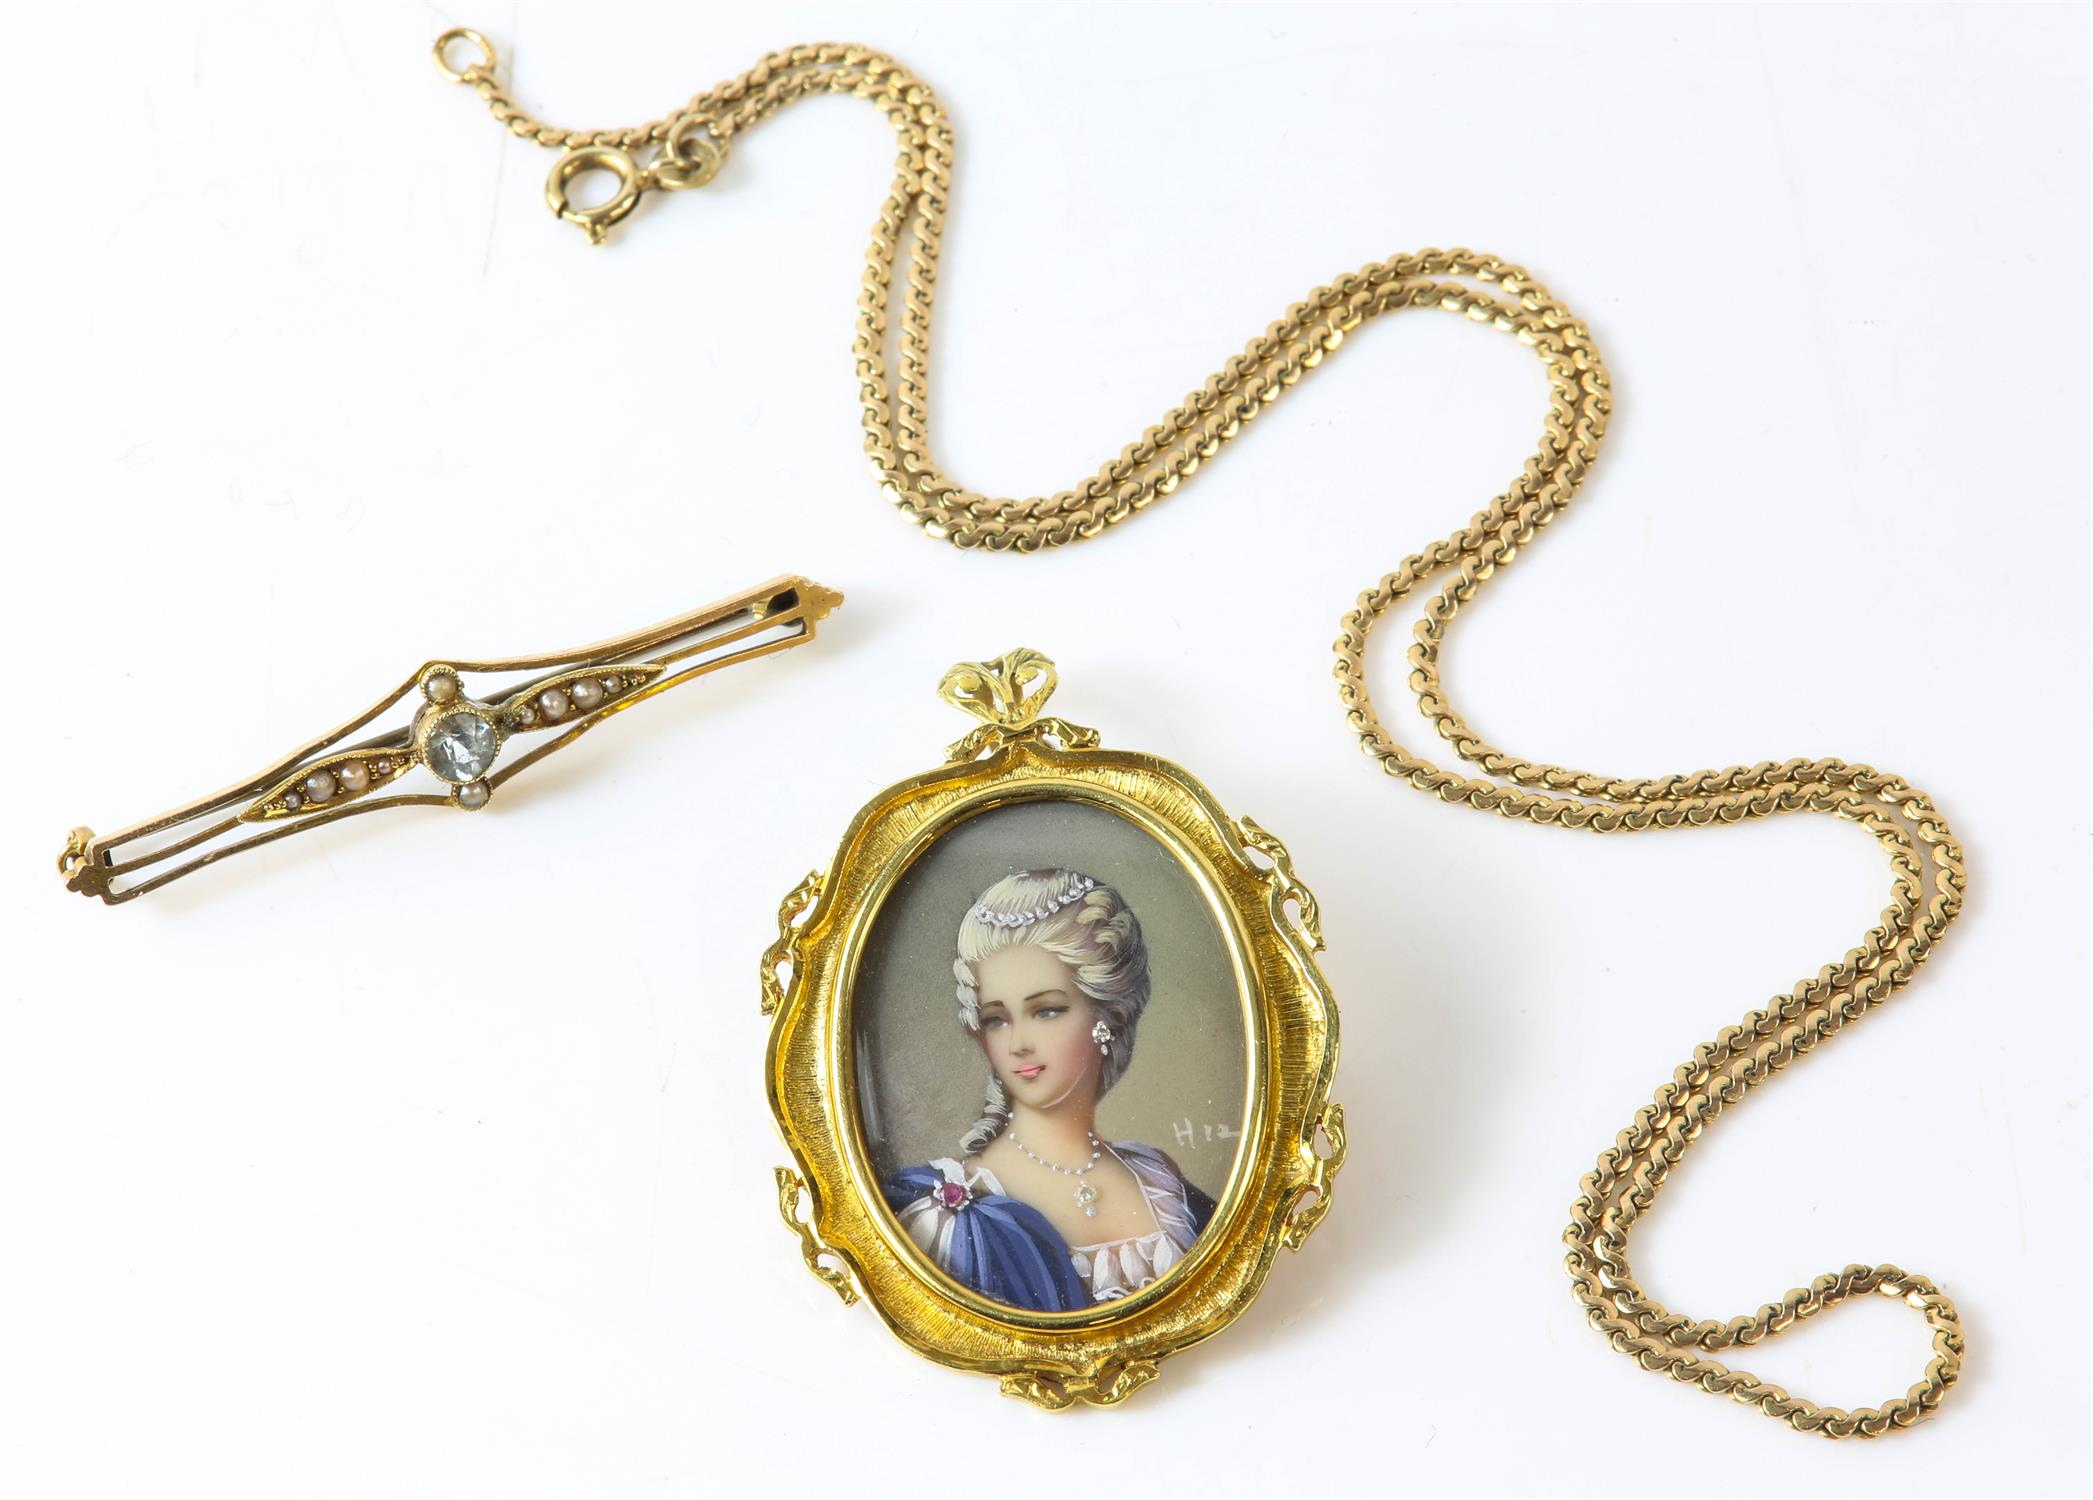 A stamped 18ct yellow gold brooch locket with an portrait of a woman wearing diamond jewellery,